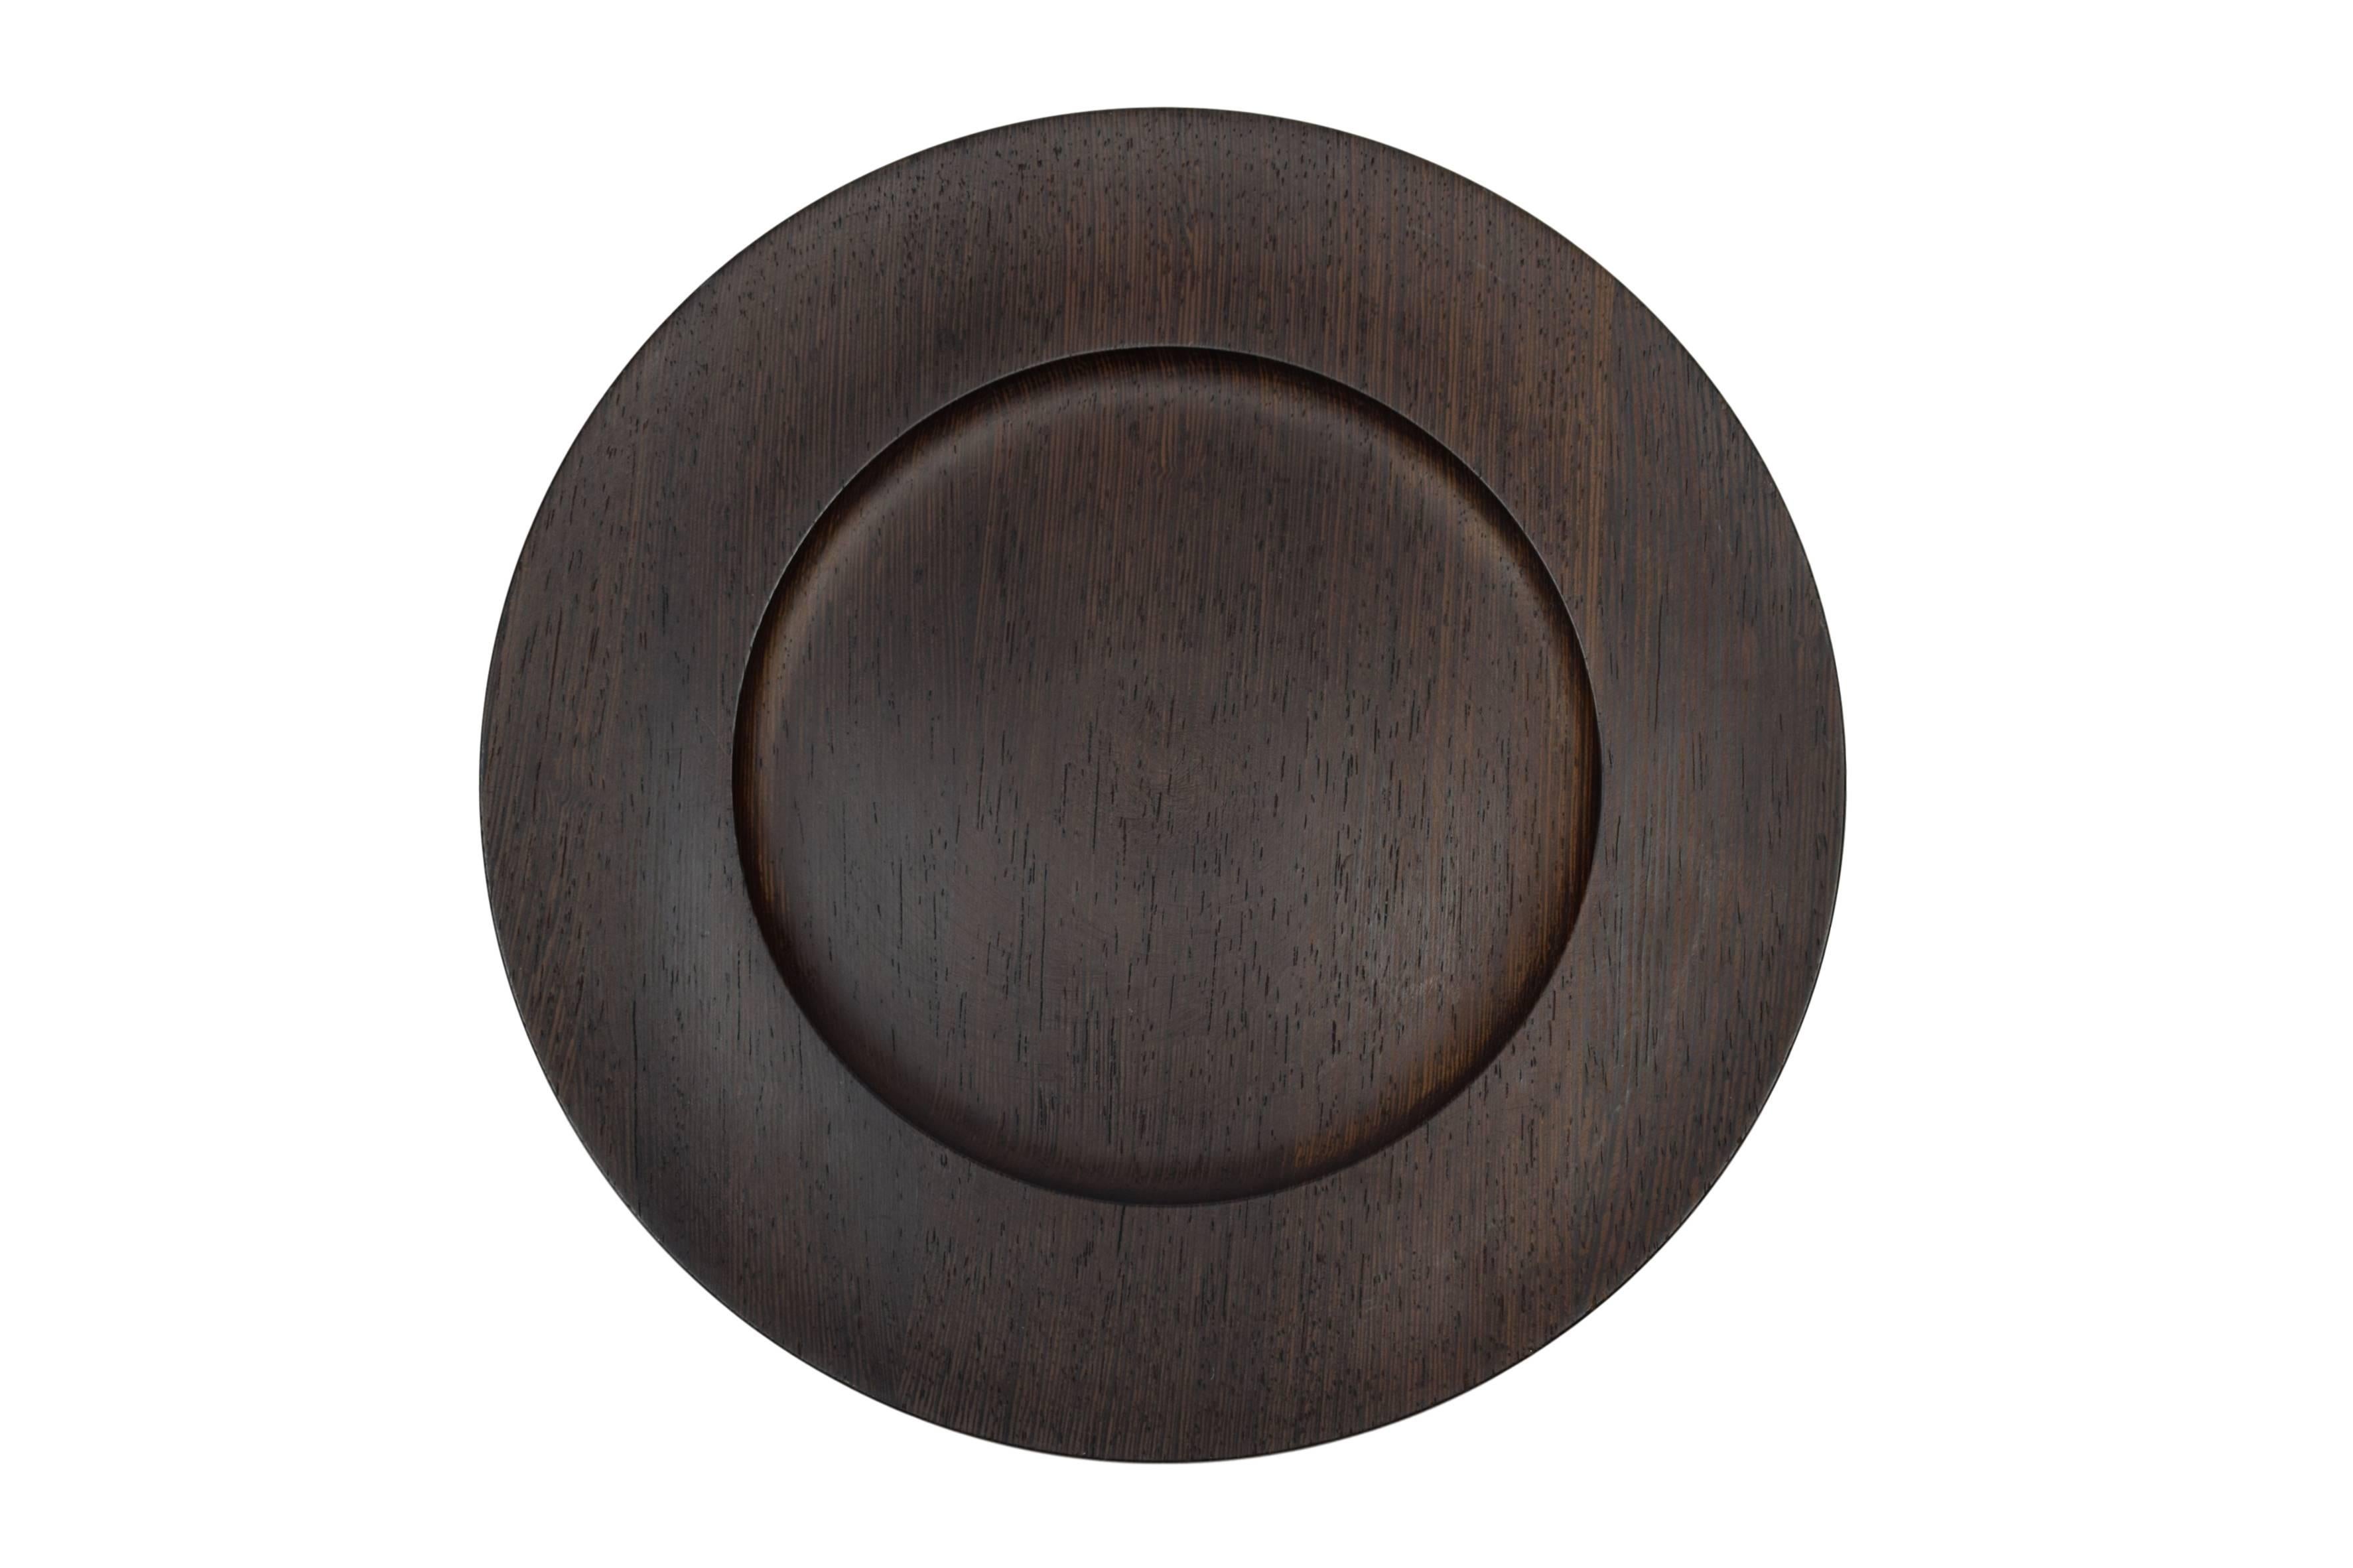 Danish Midcentury, Jens Harald Quistgaard, Three Cover Plates, Wenge, Kronjyden For Sale 1